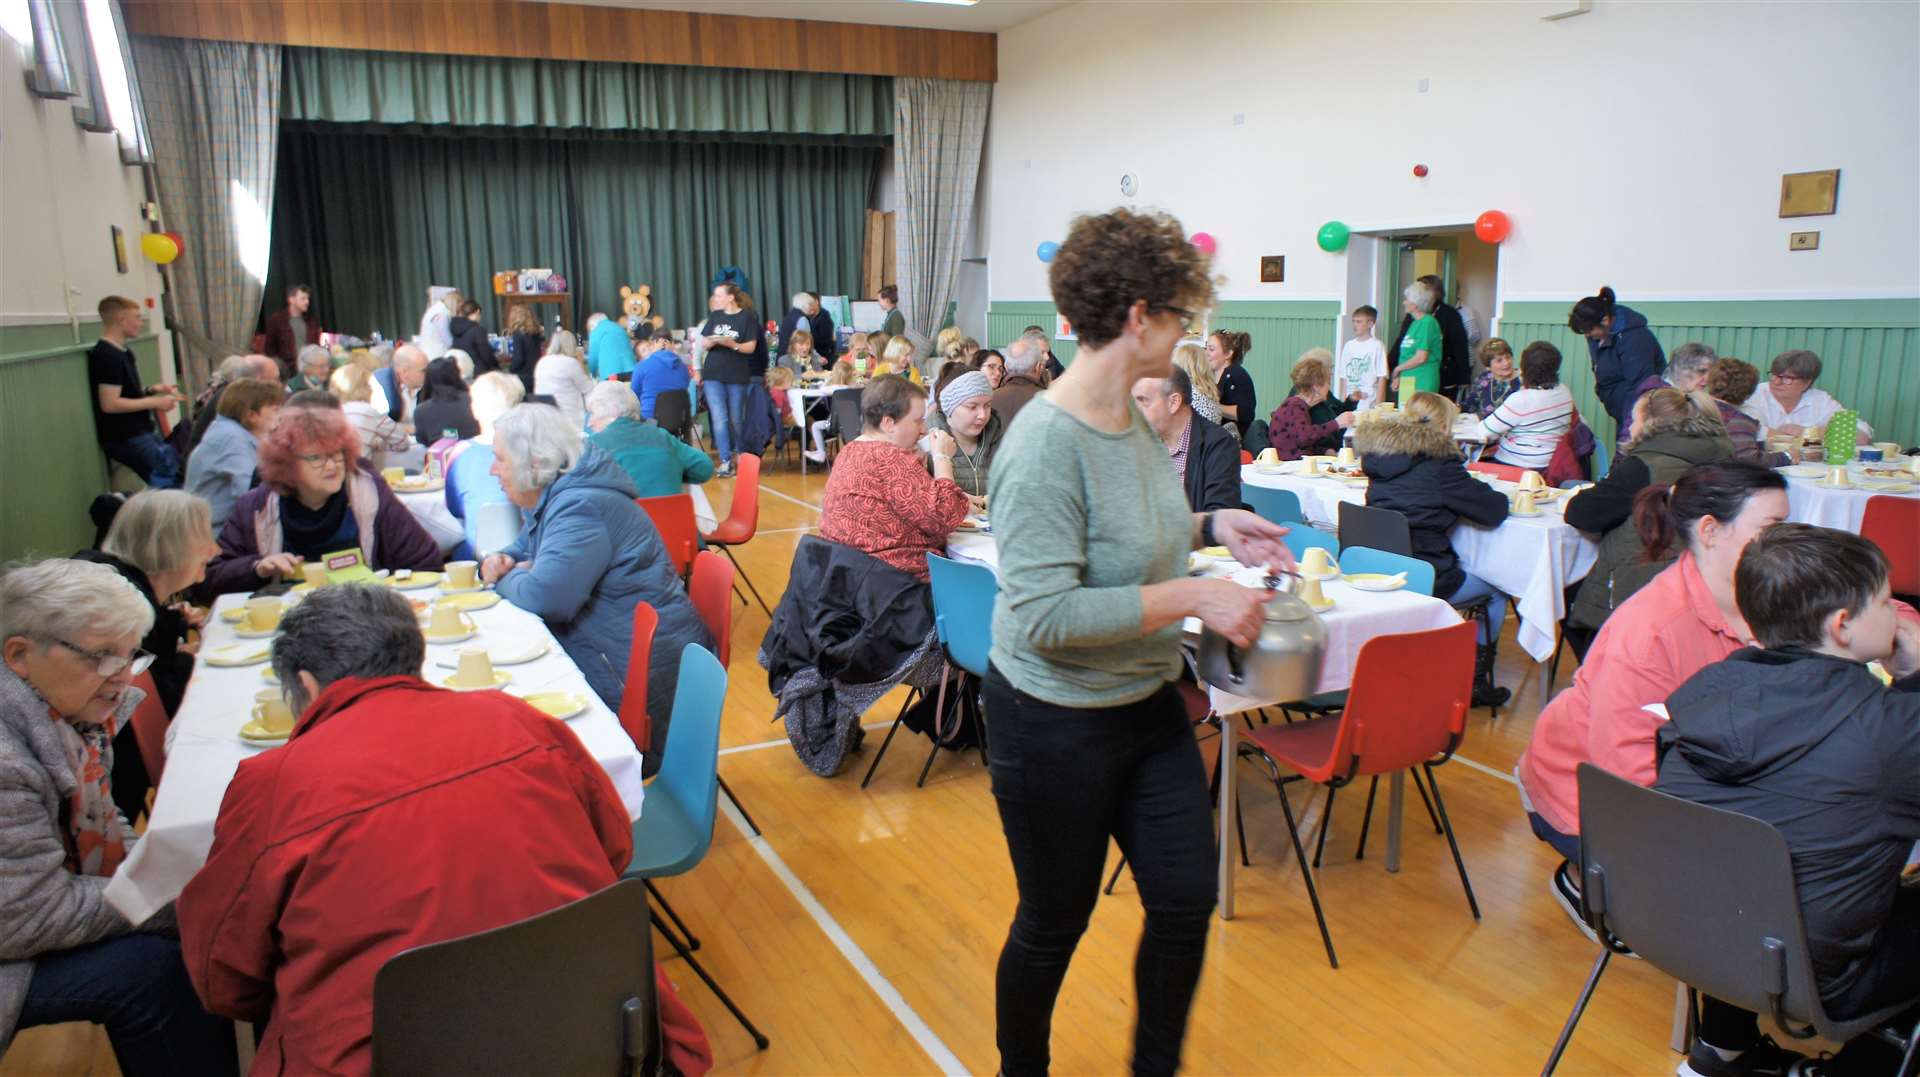 Many travelled from across the county and further afield for the Macmillan coffee morning event in Watten Village Hall. Picture: DGS